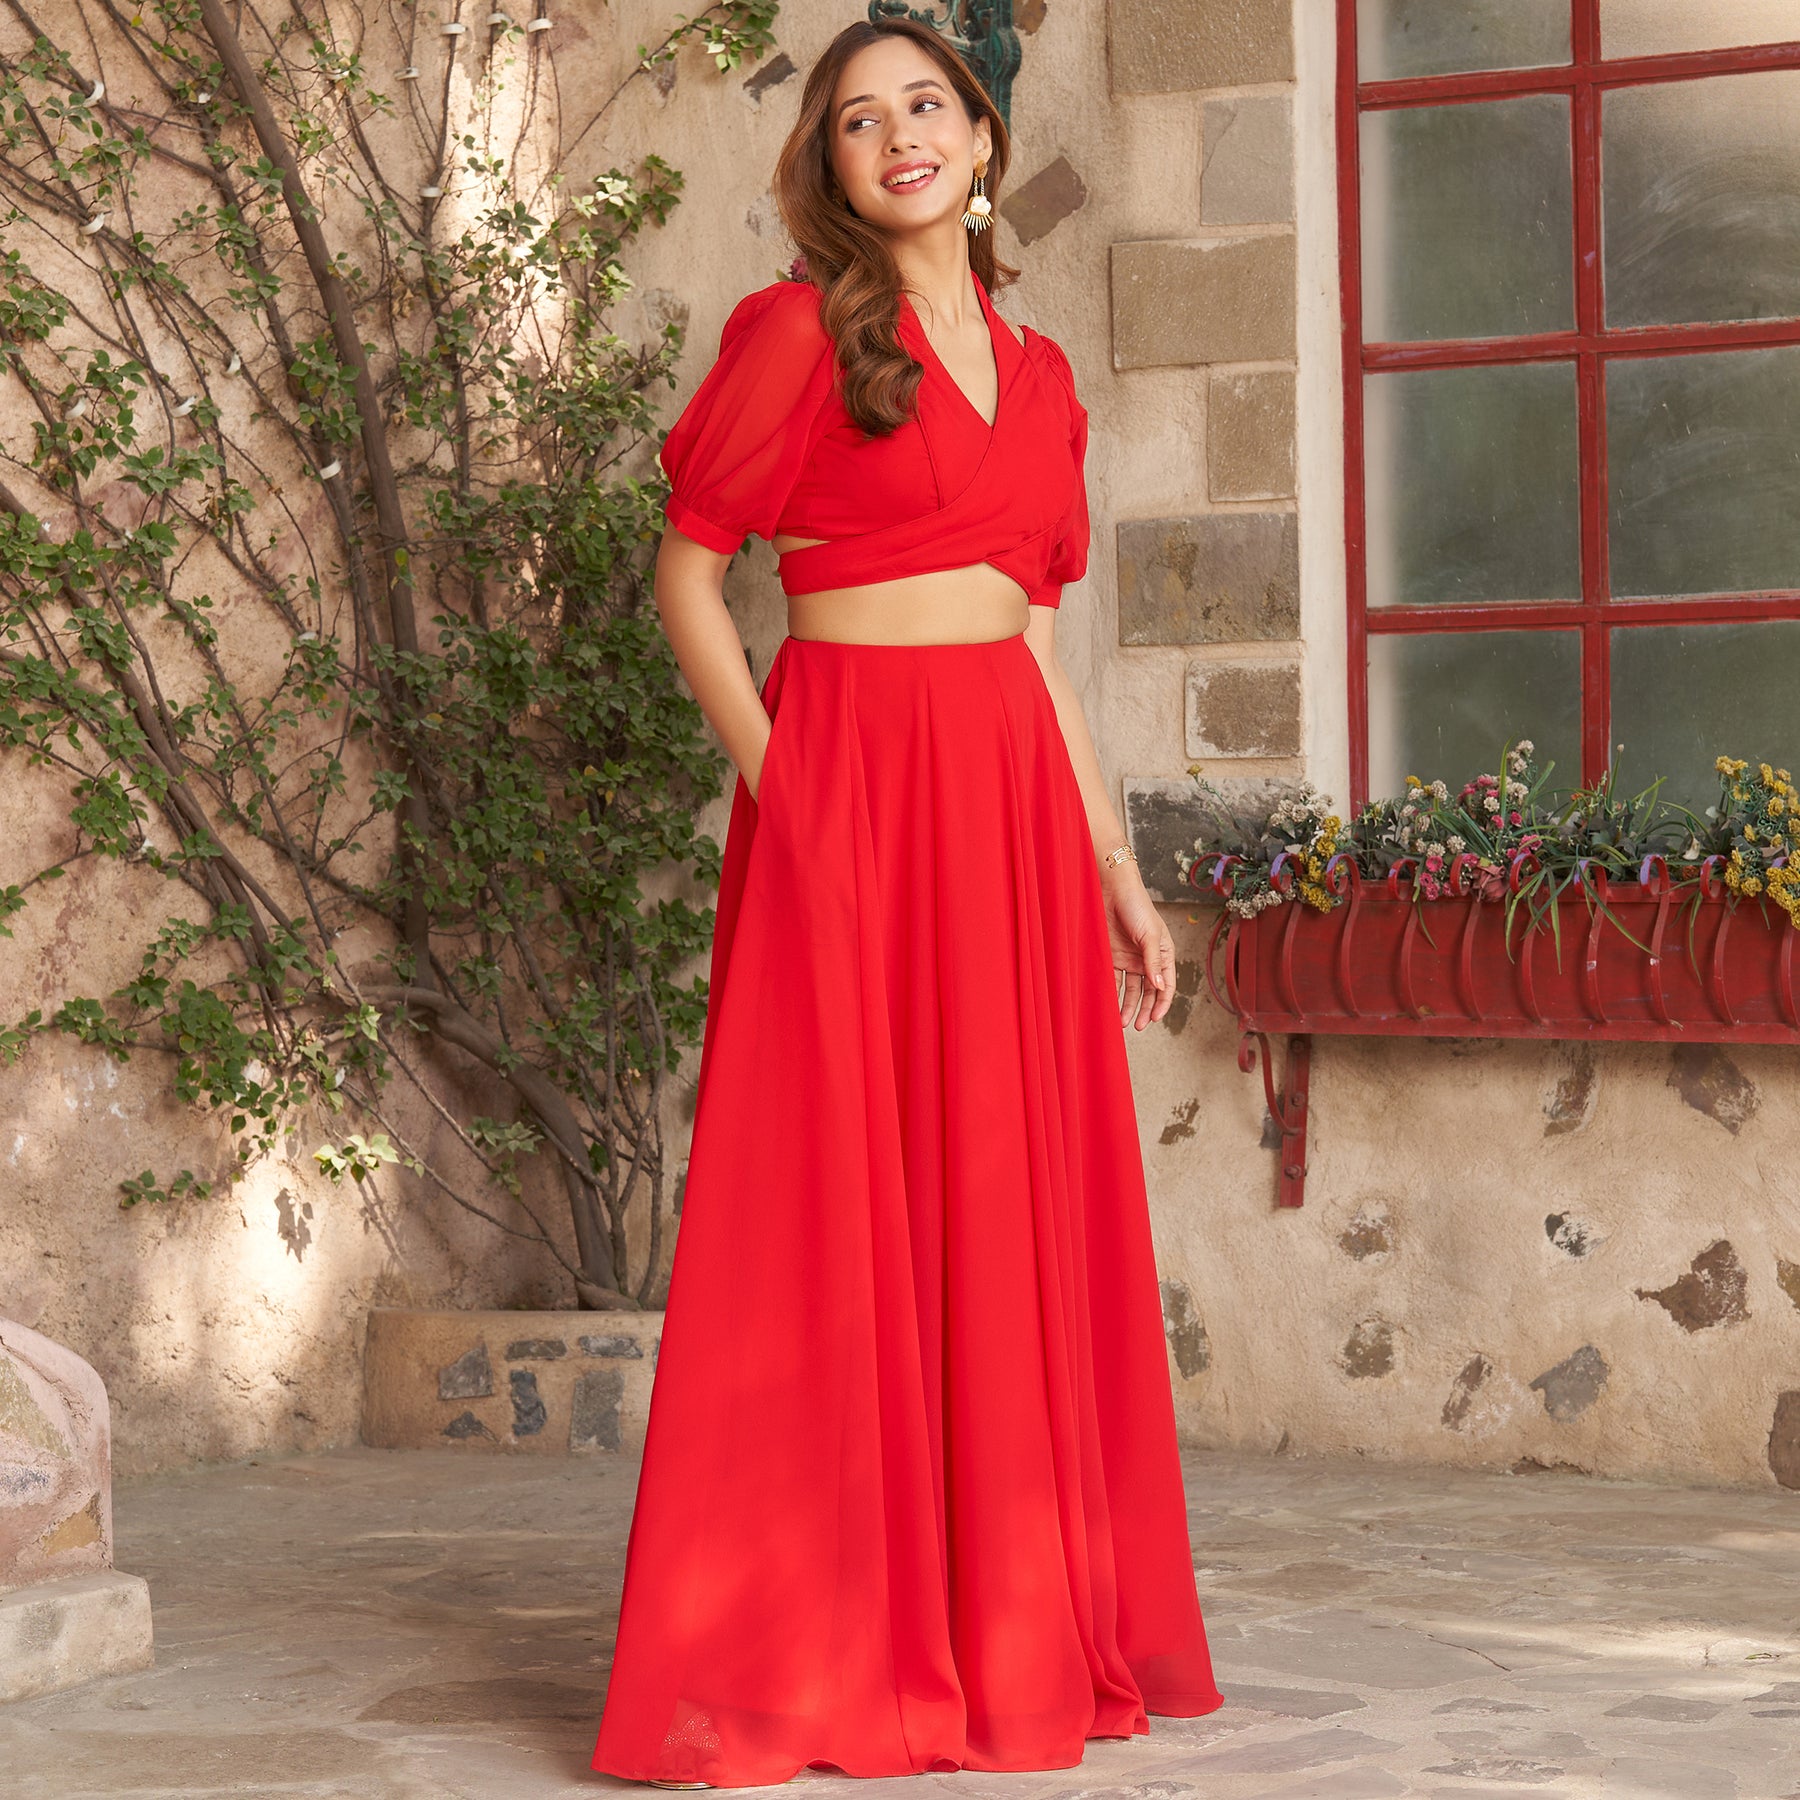 TOMATO RED CROP TOP WITH SKIRT